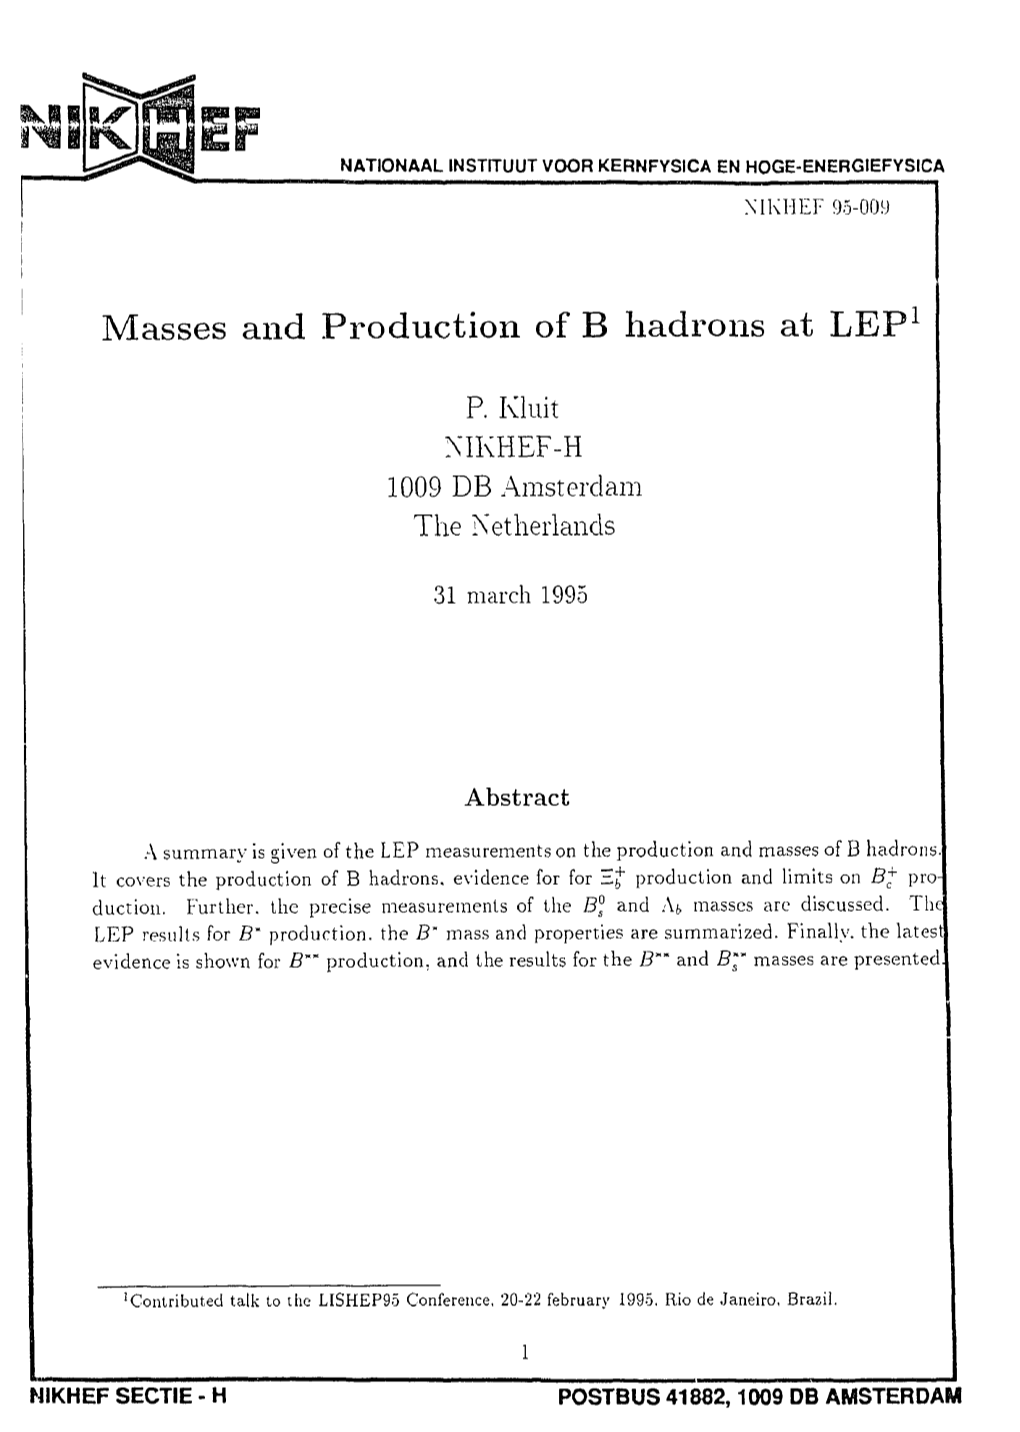 Masses and Production of B Hadrons at LEP